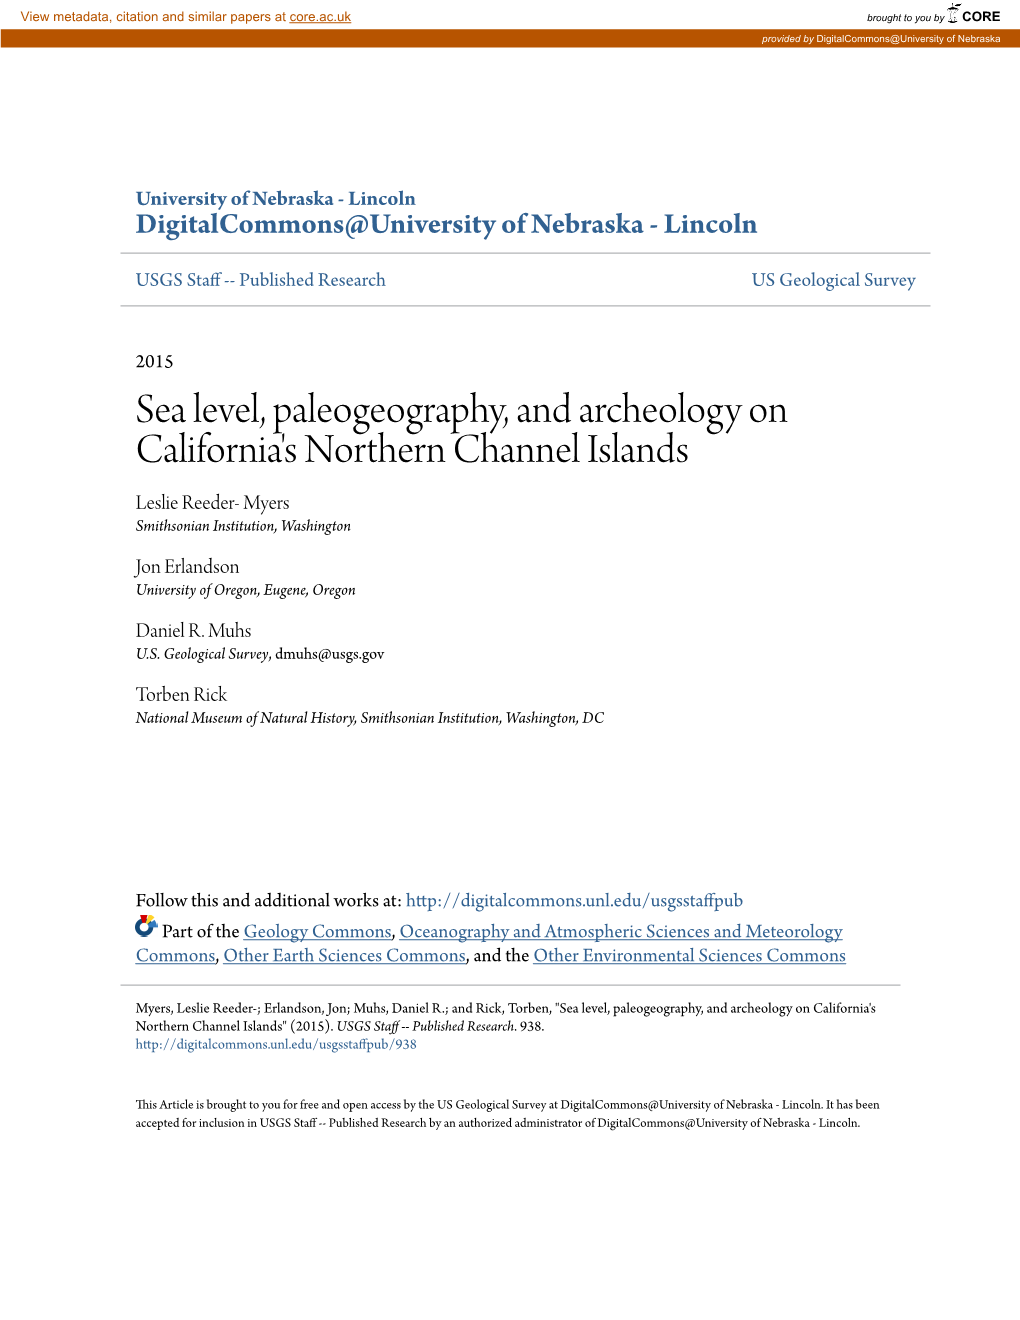 Sea Level, Paleogeography, and Archeology on California's Northern Channel Islands Leslie Reeder- Myers Smithsonian Institution, Washington